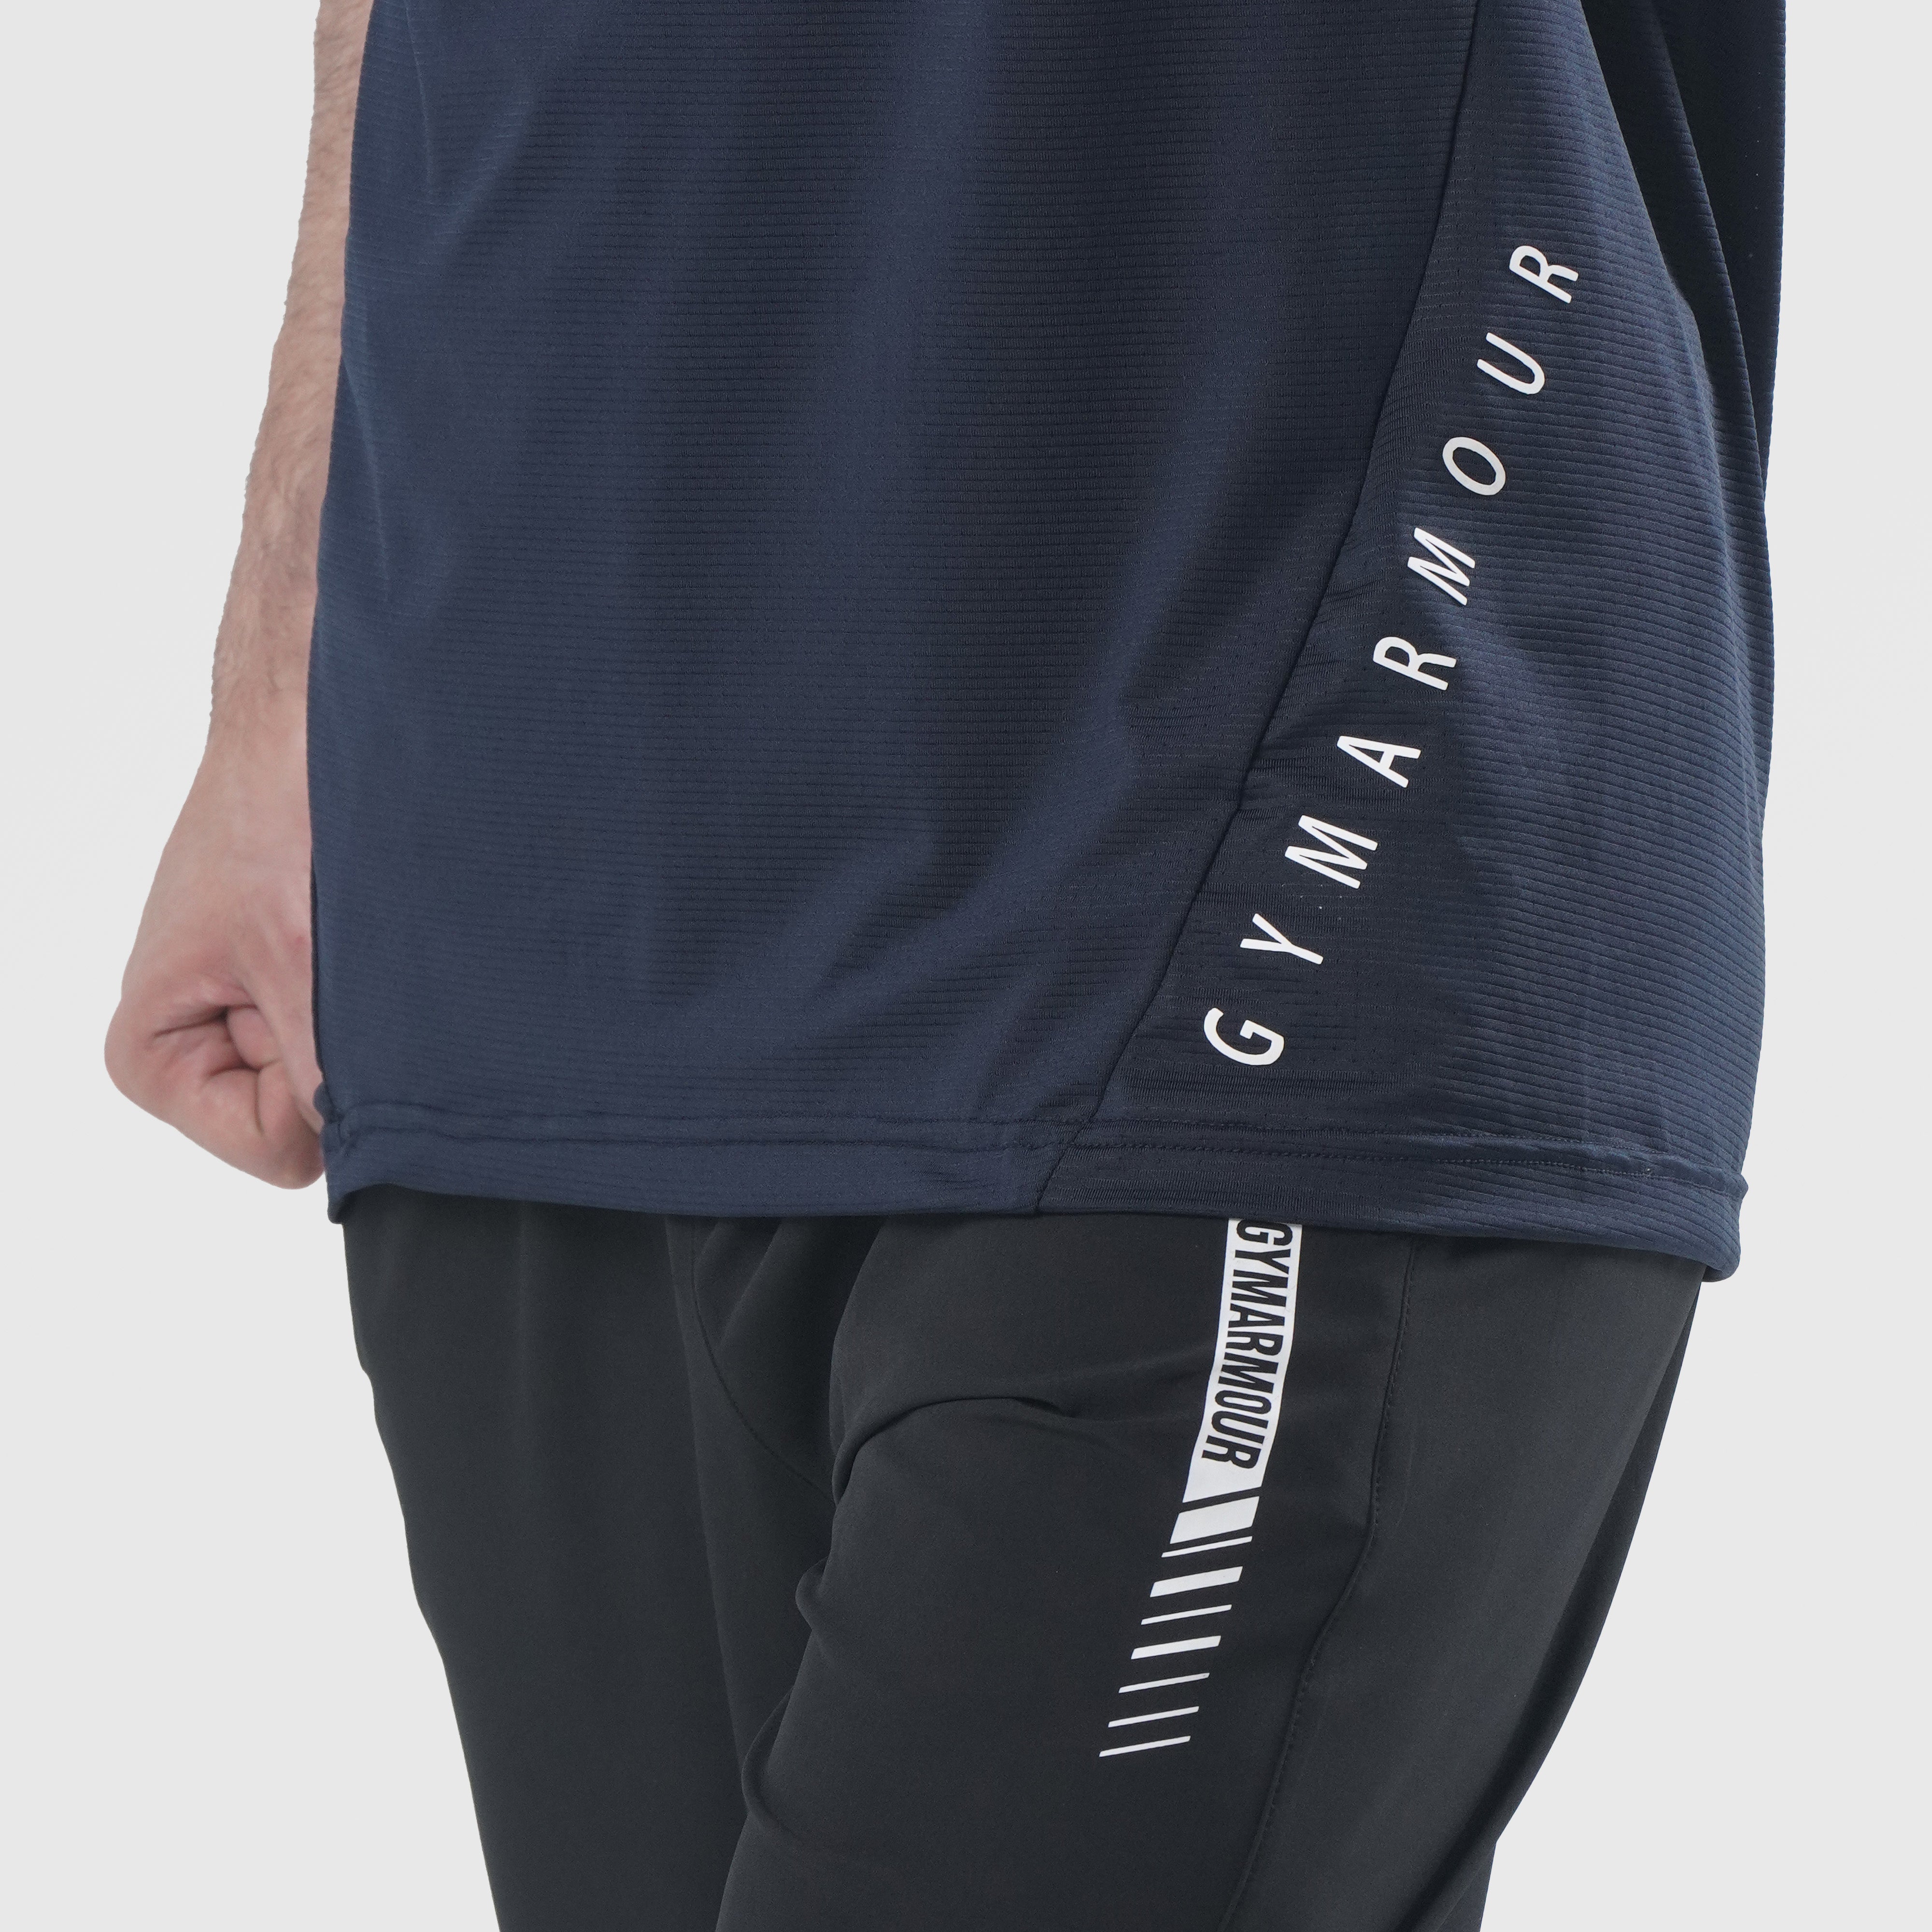 Stretch Pulse Performance Tee (Navy)